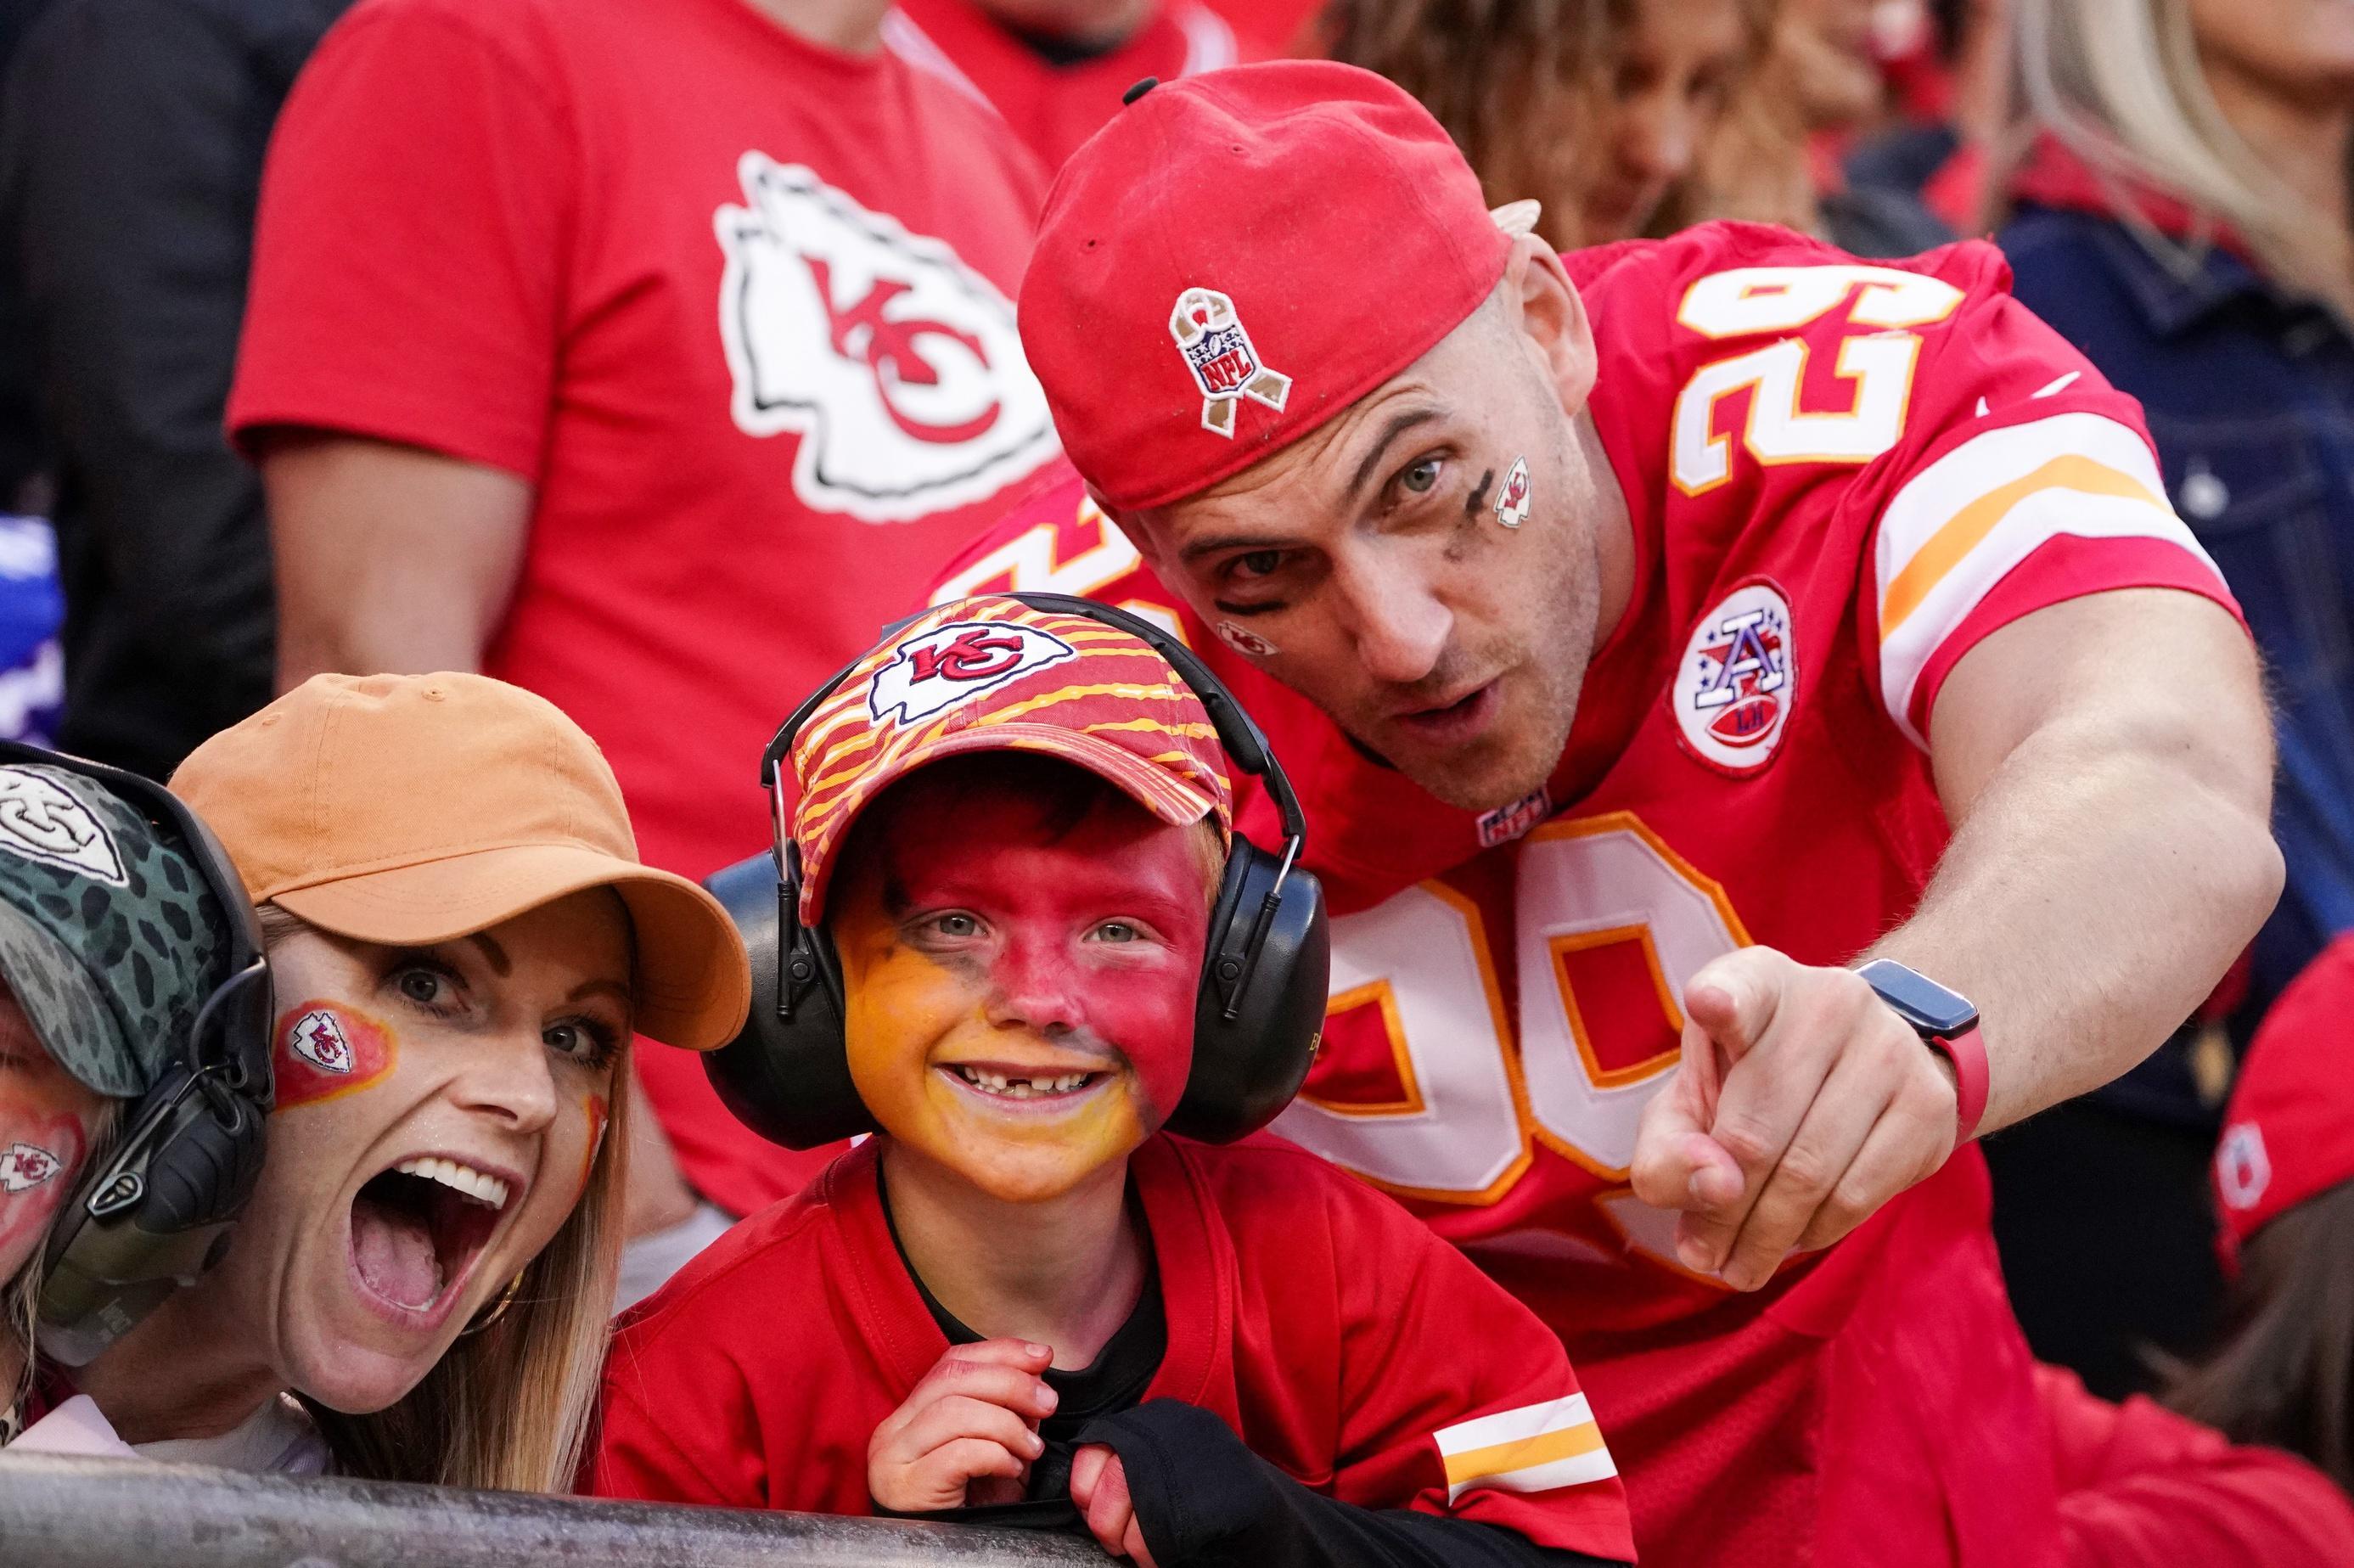 Watch Kansas City Chiefs vs. Los Angeles Chargers: TV channel, live stream info, start time